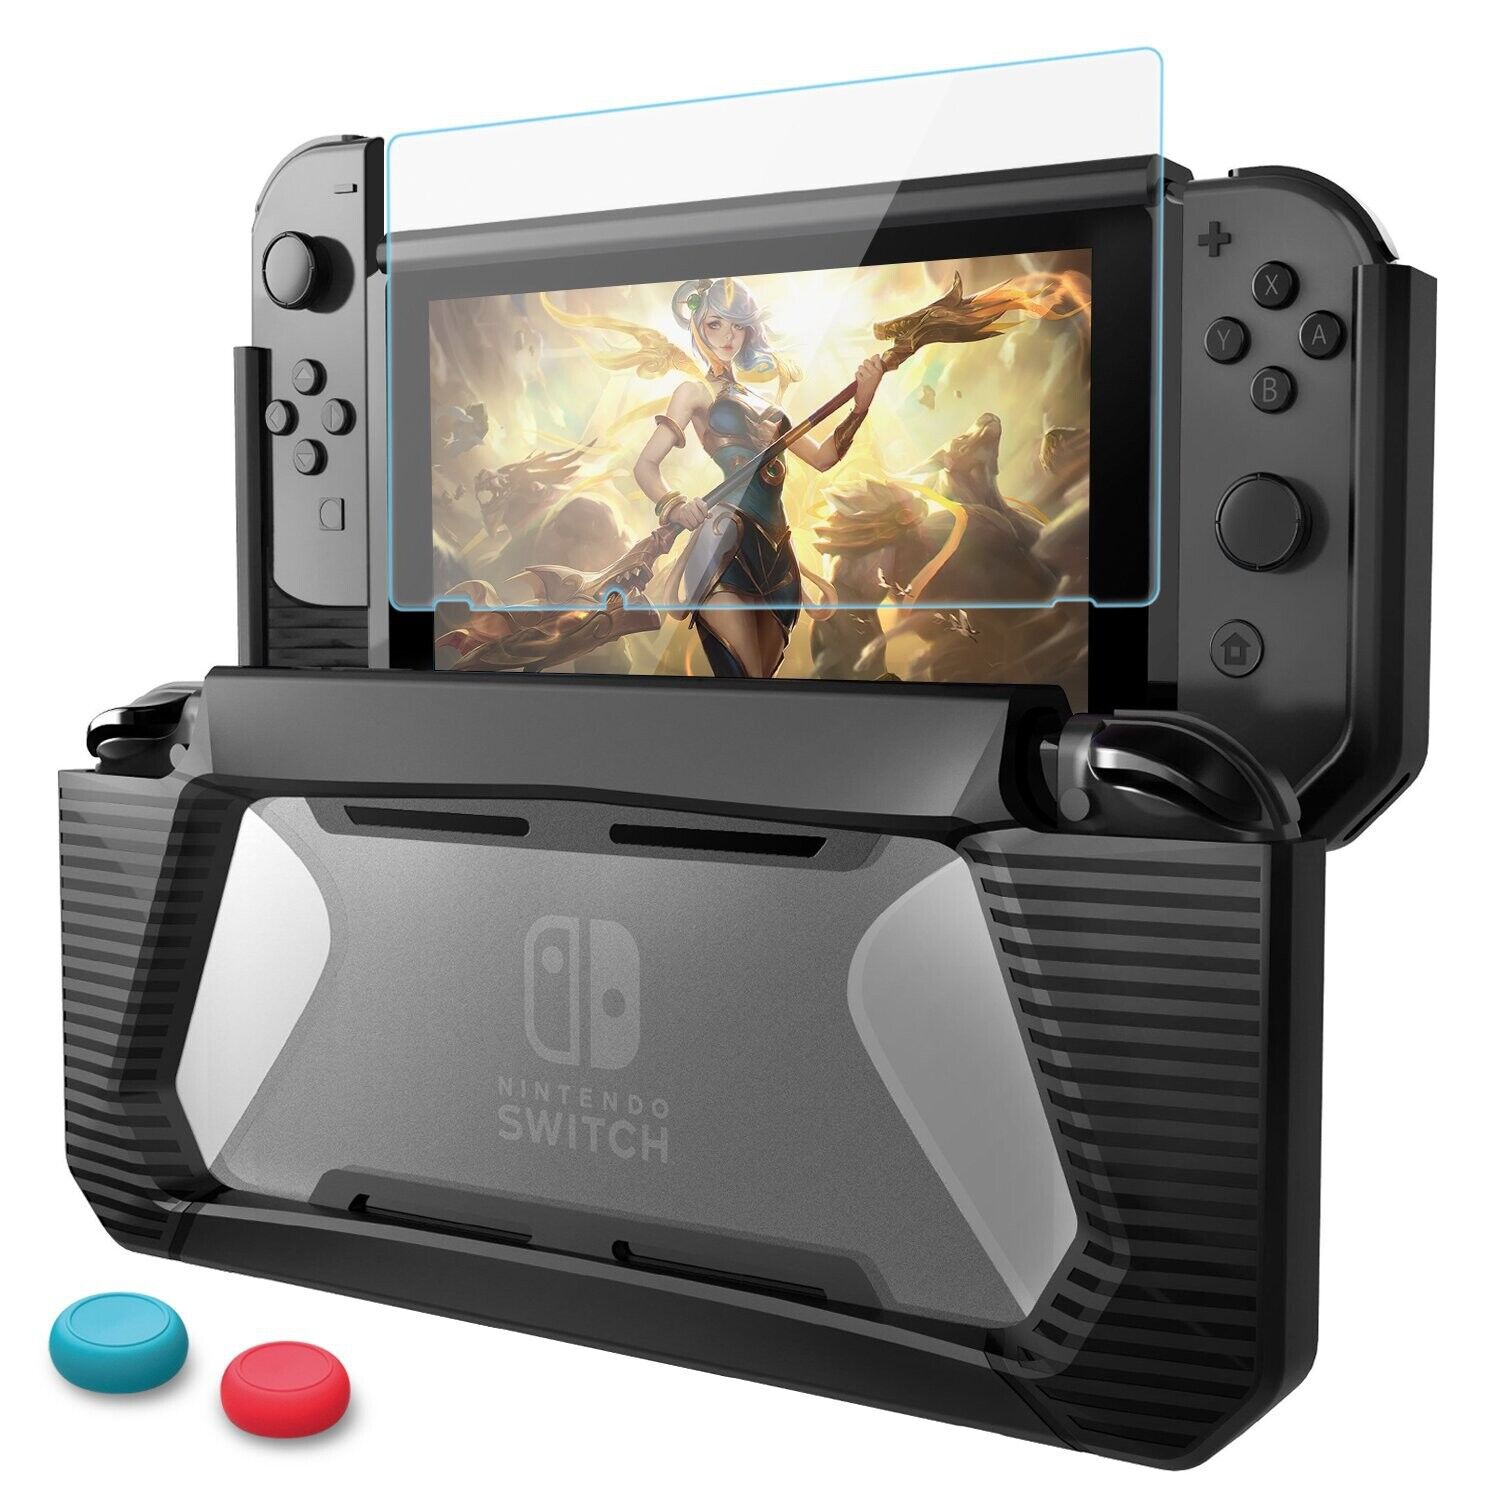 Nintendo Switch Tempered Screen Protector & Heavy-Duty Protective Cover Case